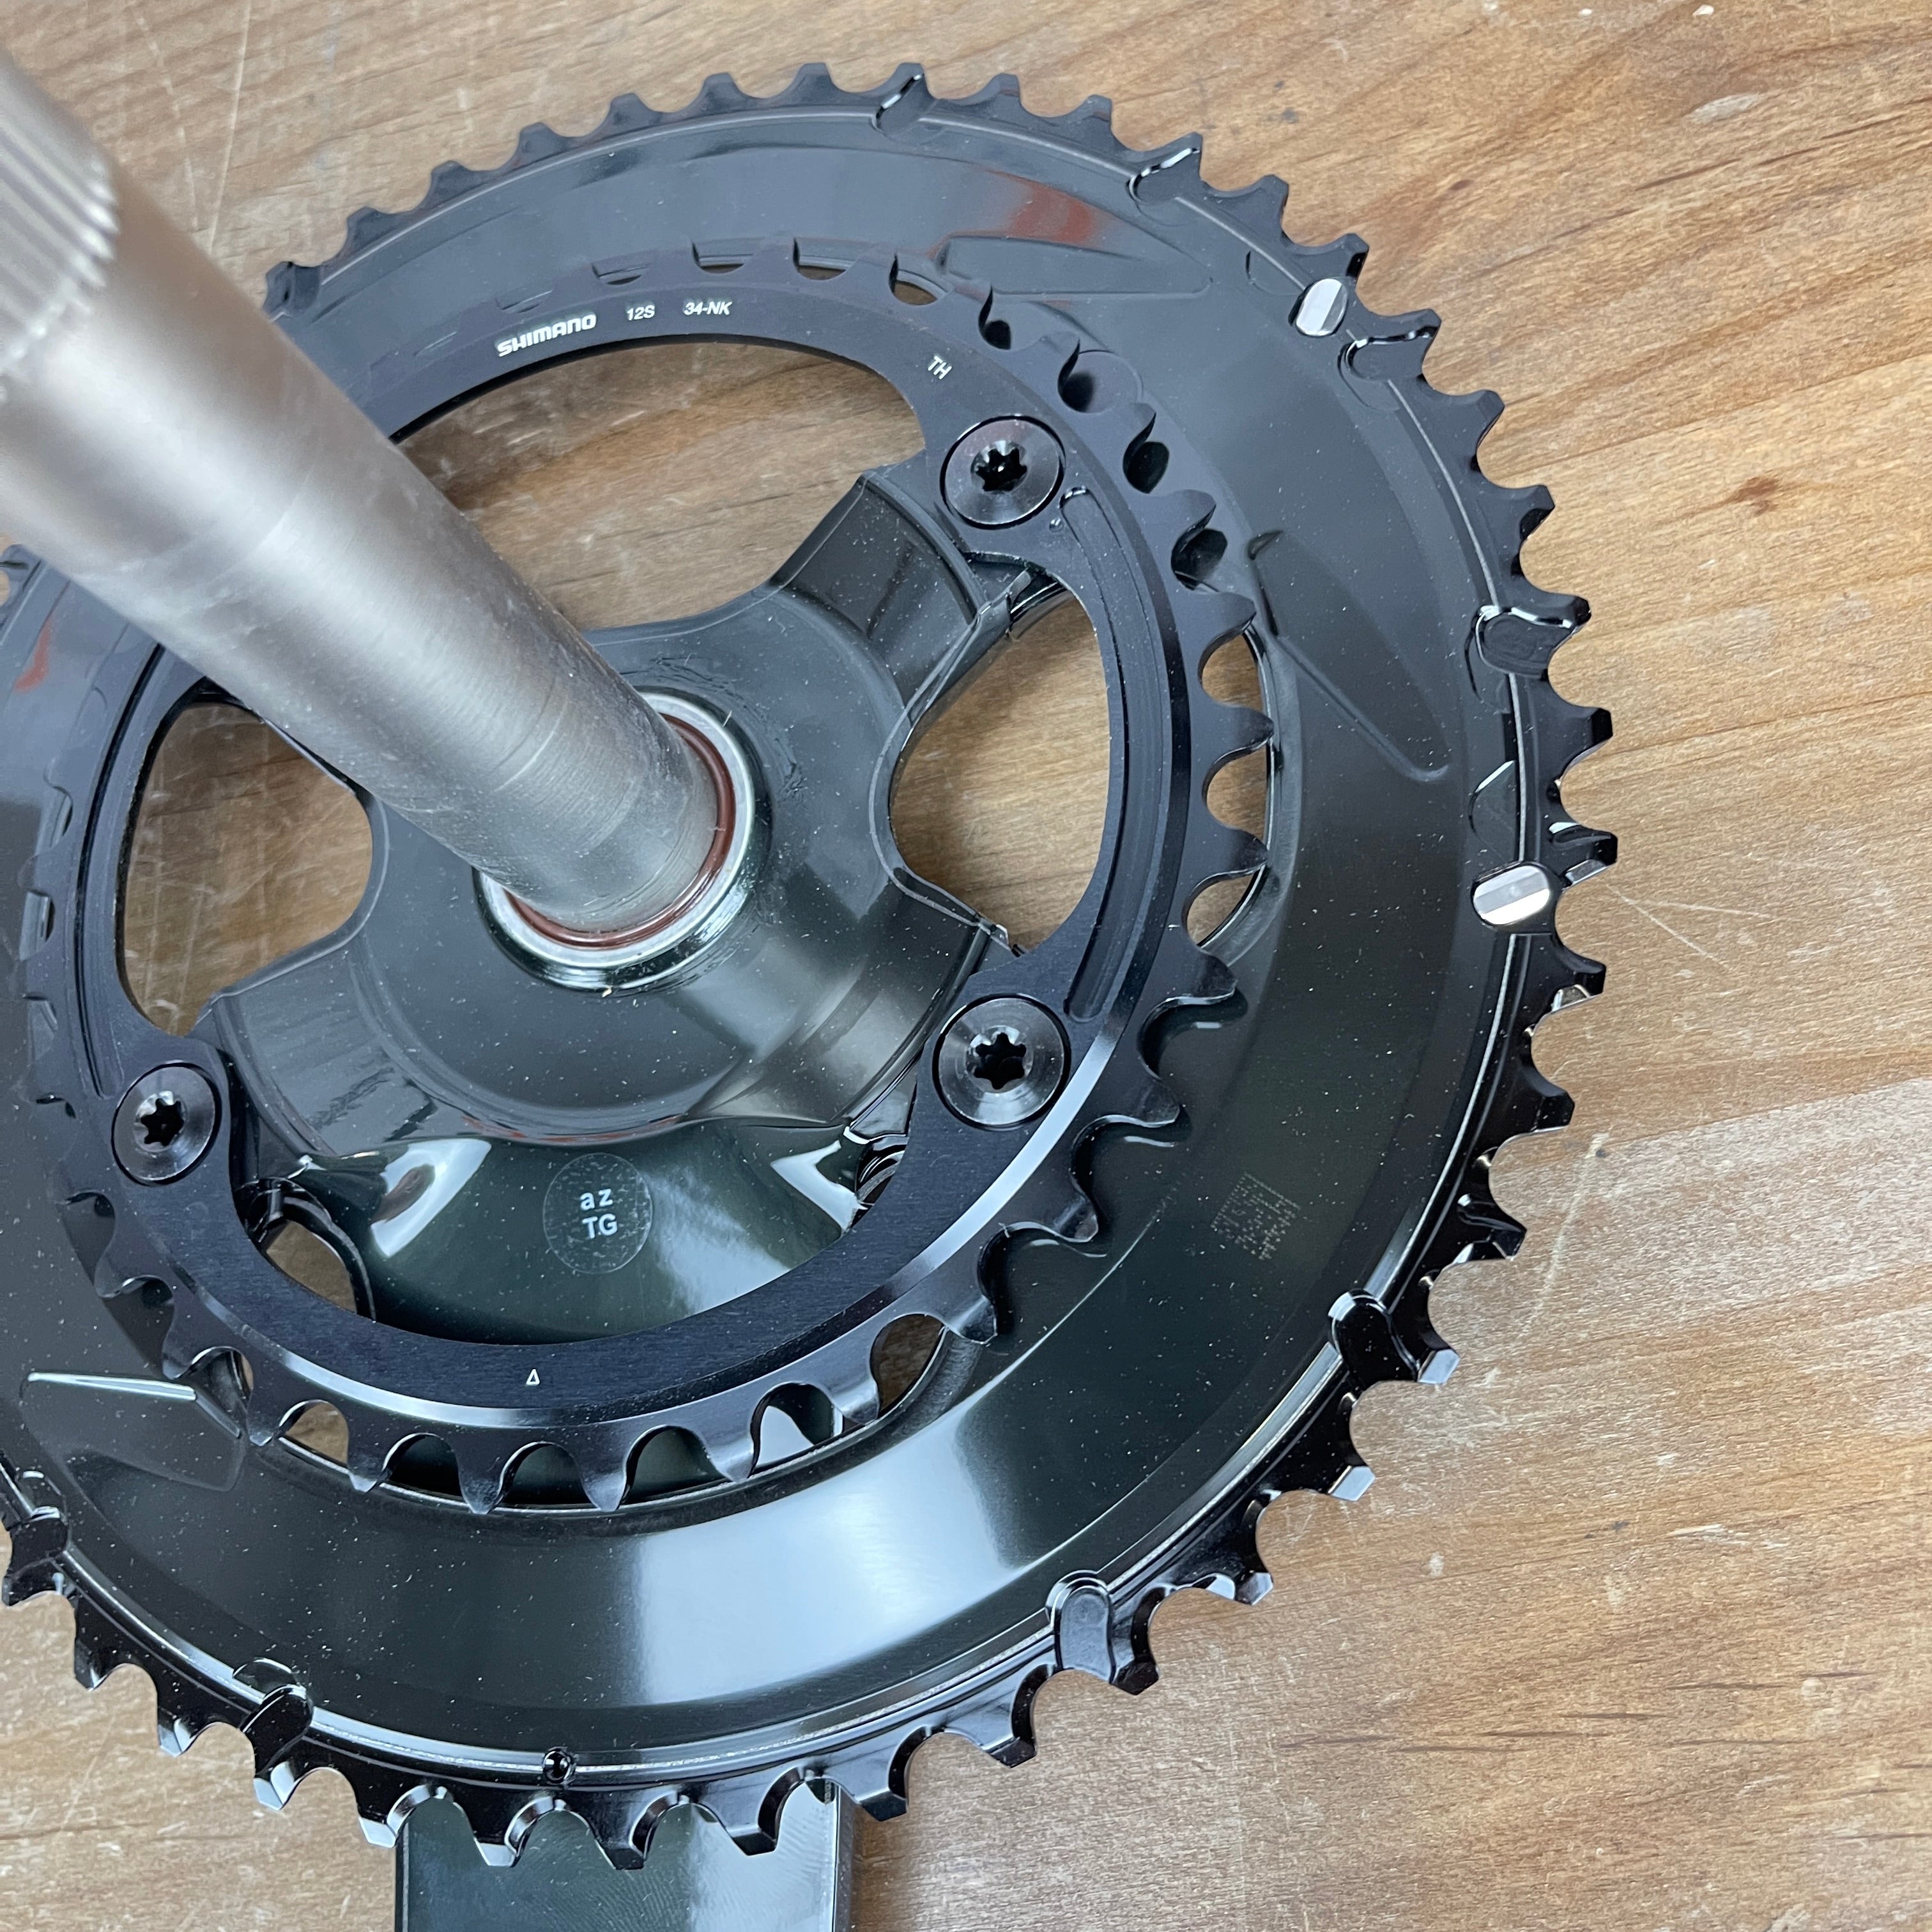 New! Shimano Dura Ace FC-R9200 50/34t 172.5mm 12-Speed